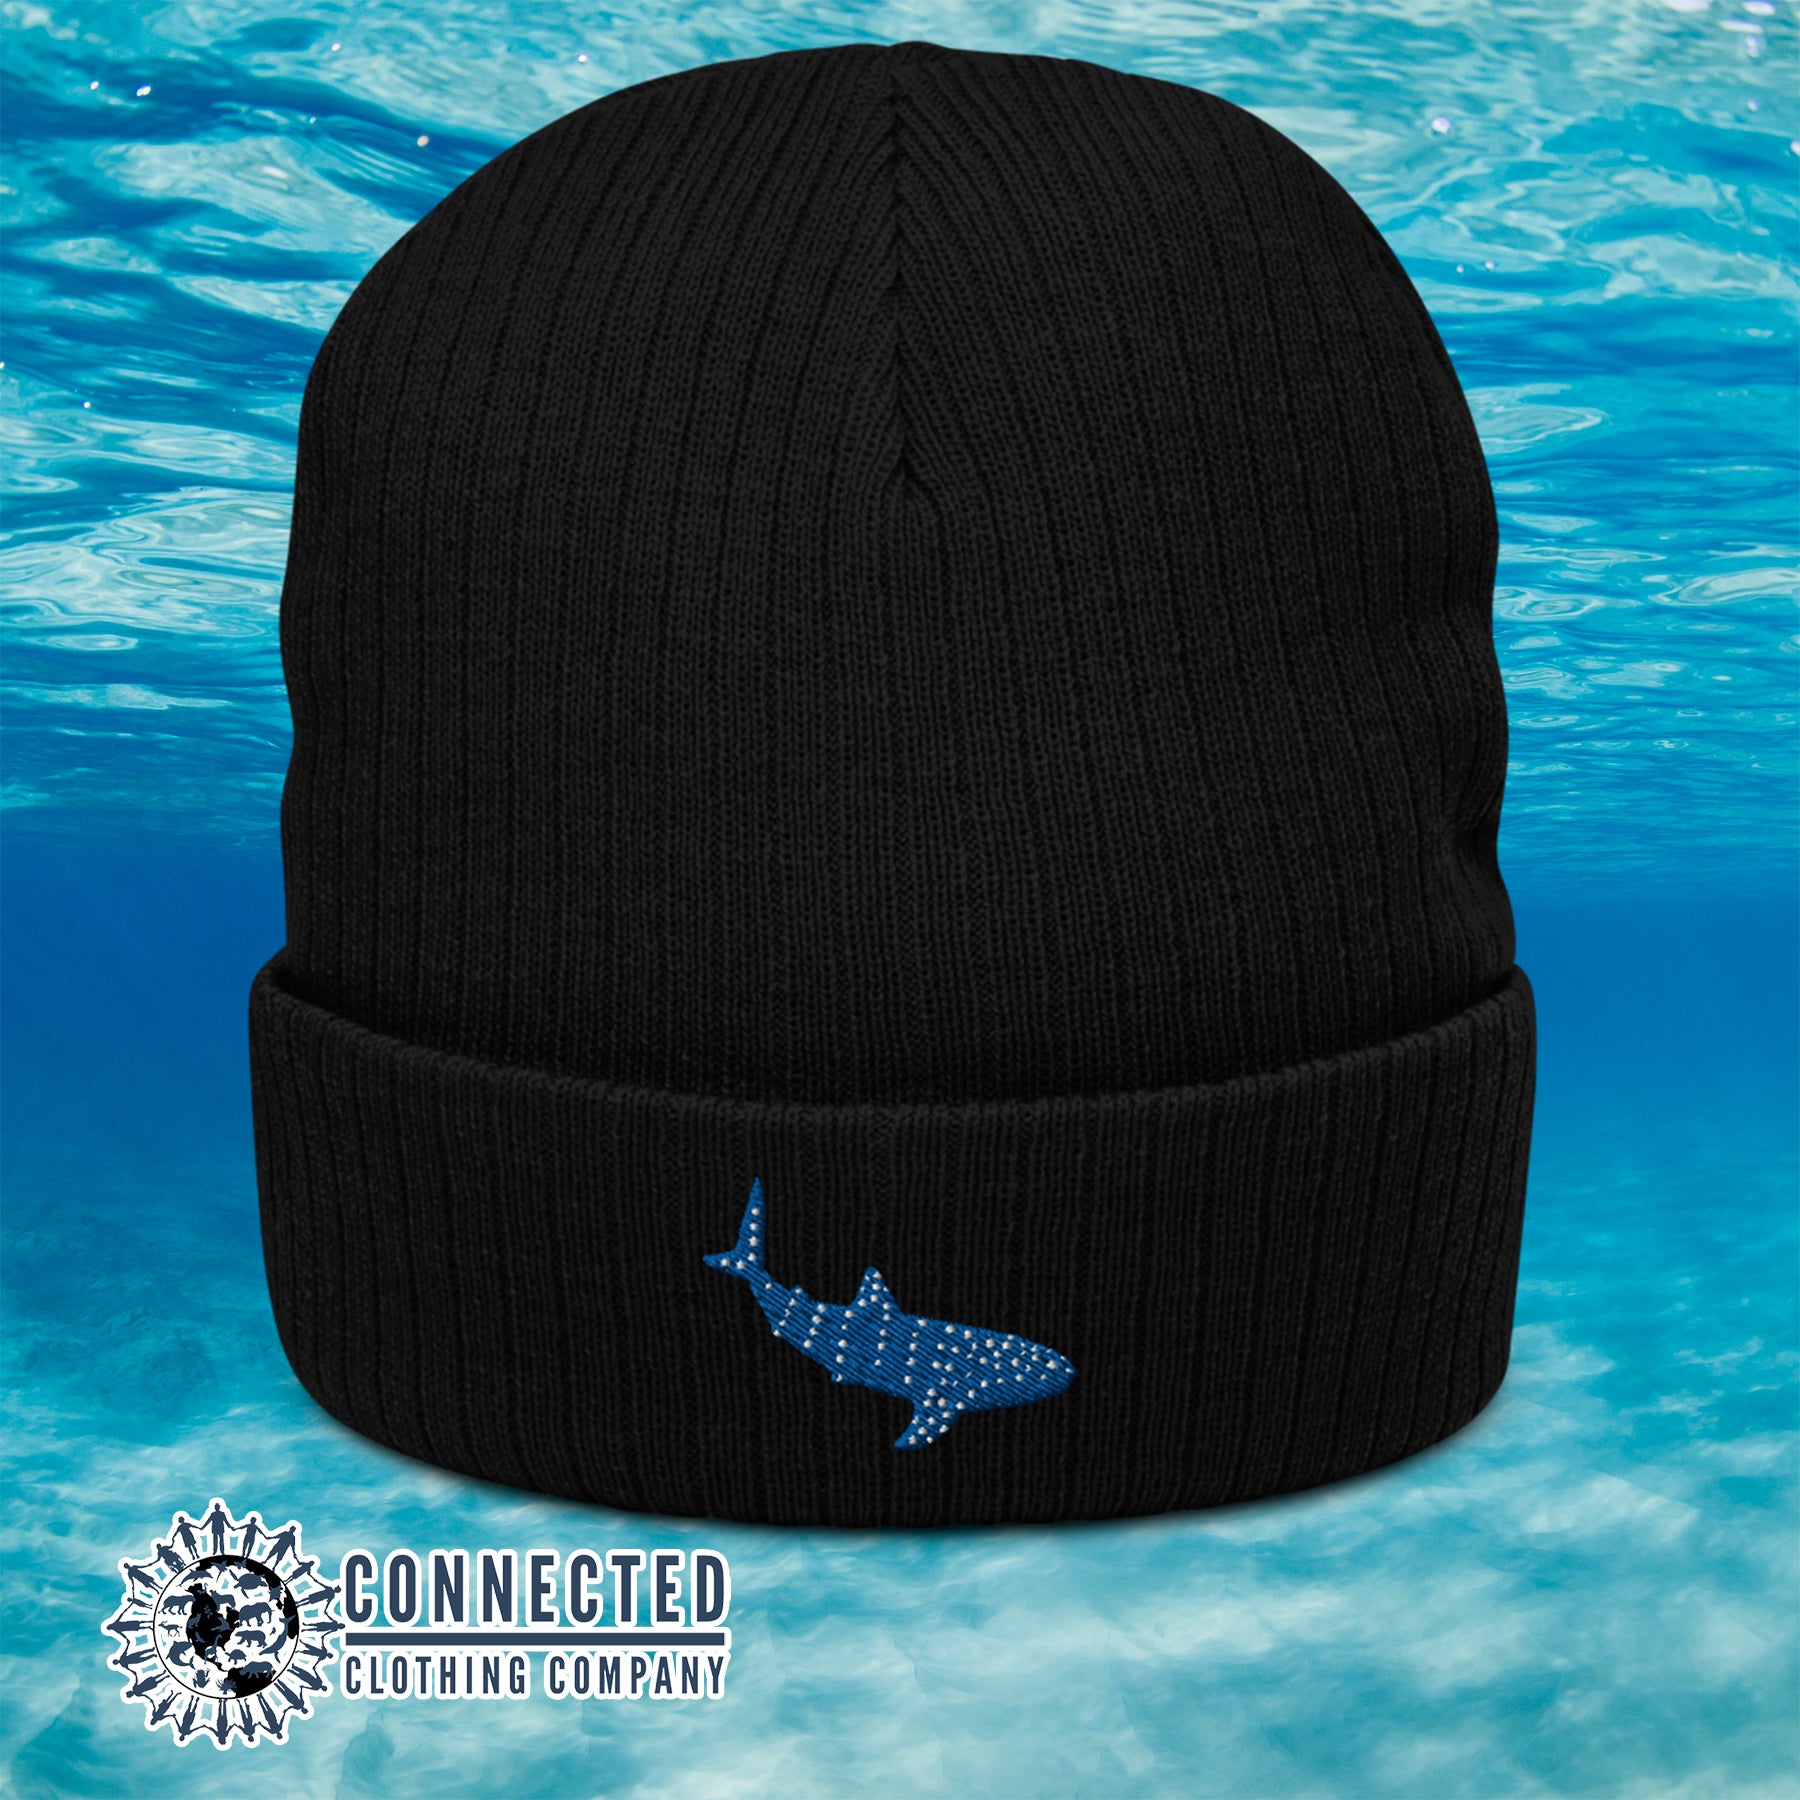 Black Whale Shark Recycled Cuffed Beanie - sweetsherriloudesigns - Ethically and Sustainably Made - 10% donated to Mission Blue ocean conservation